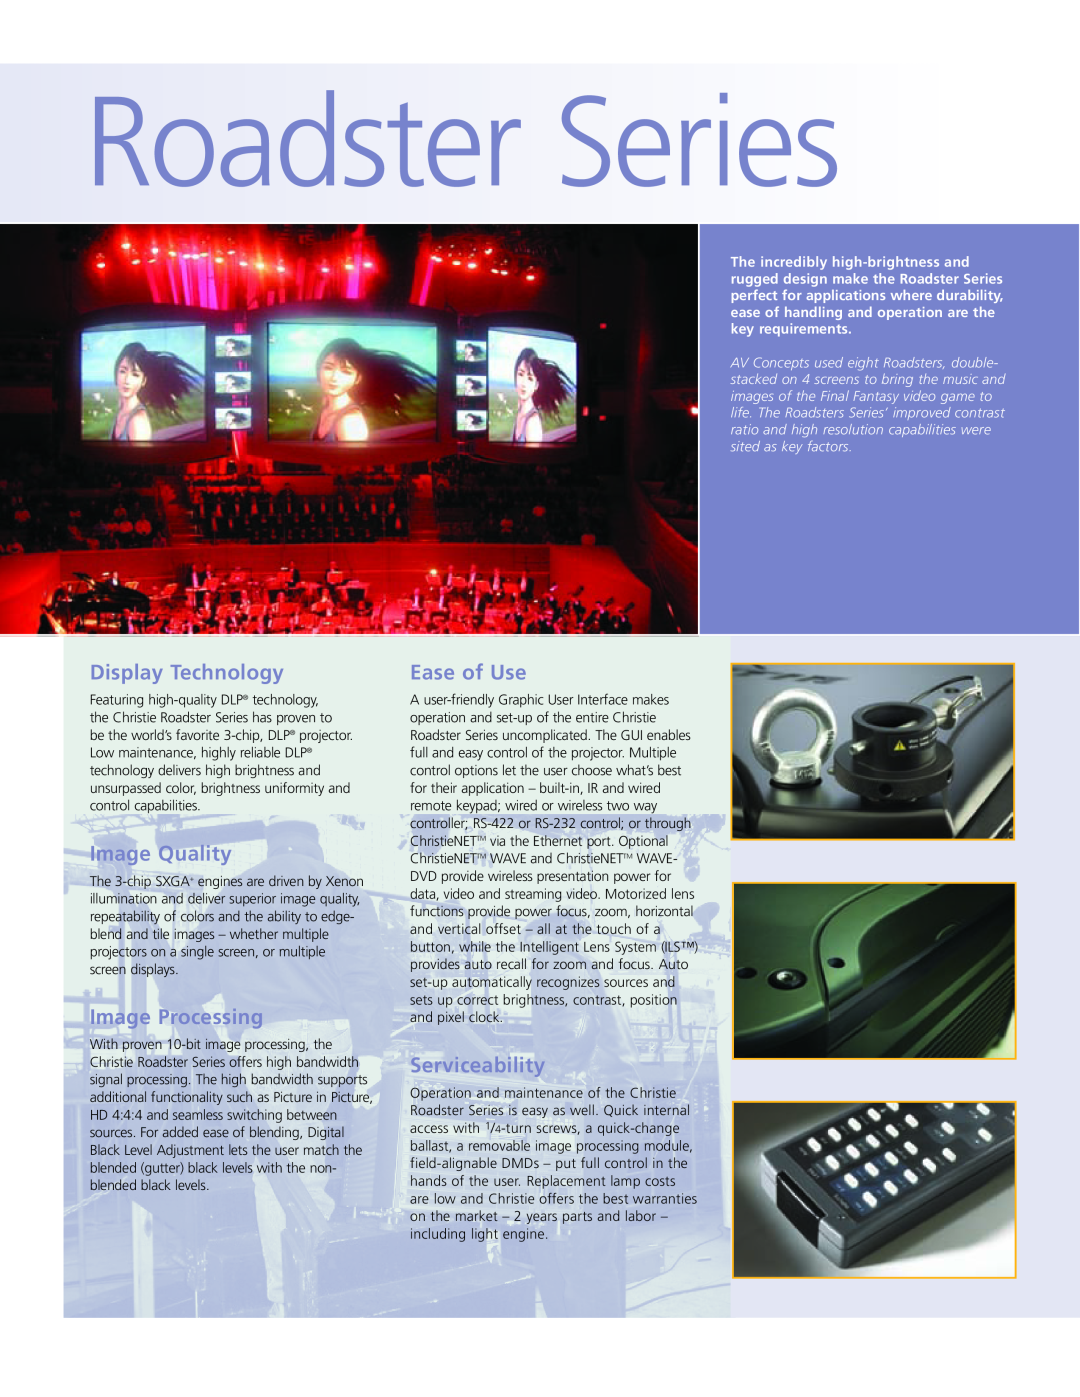 Christie Digital Systems Roadster Series Display Technology, Image Quality, Image Processing, Ease of Use, Serviceability 